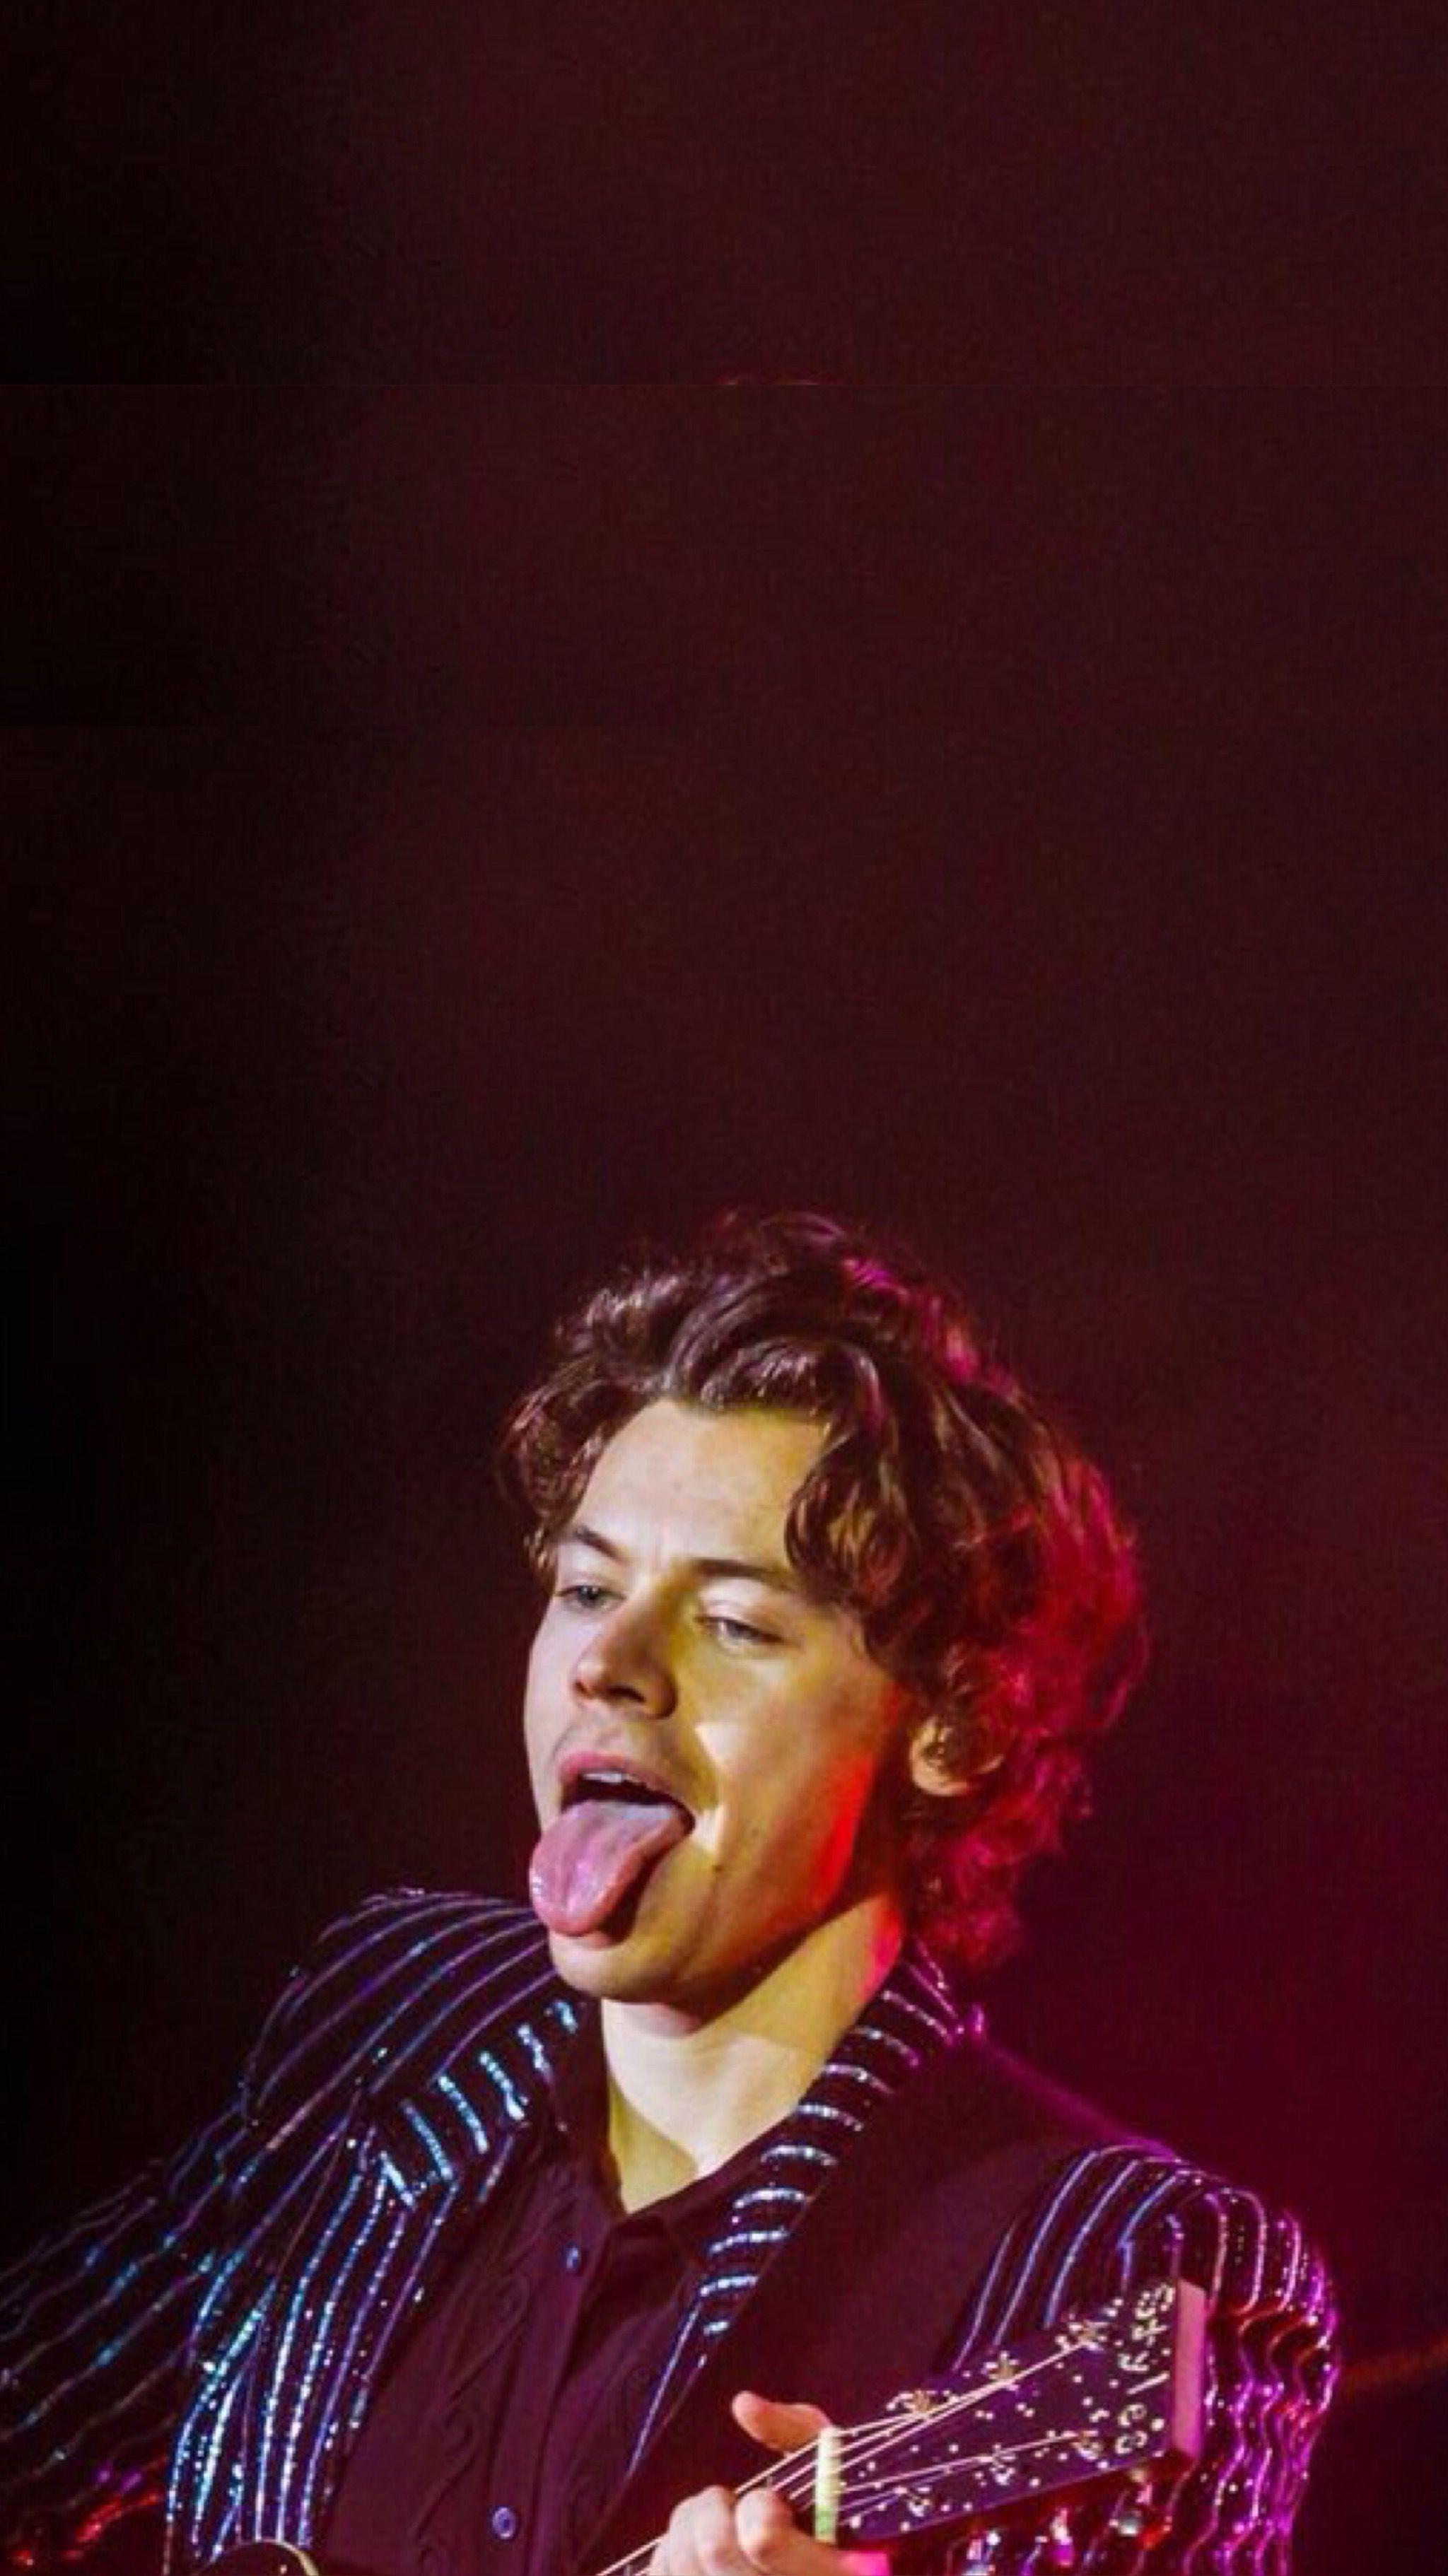 A man with his mouth open playing guitar - Harry Styles